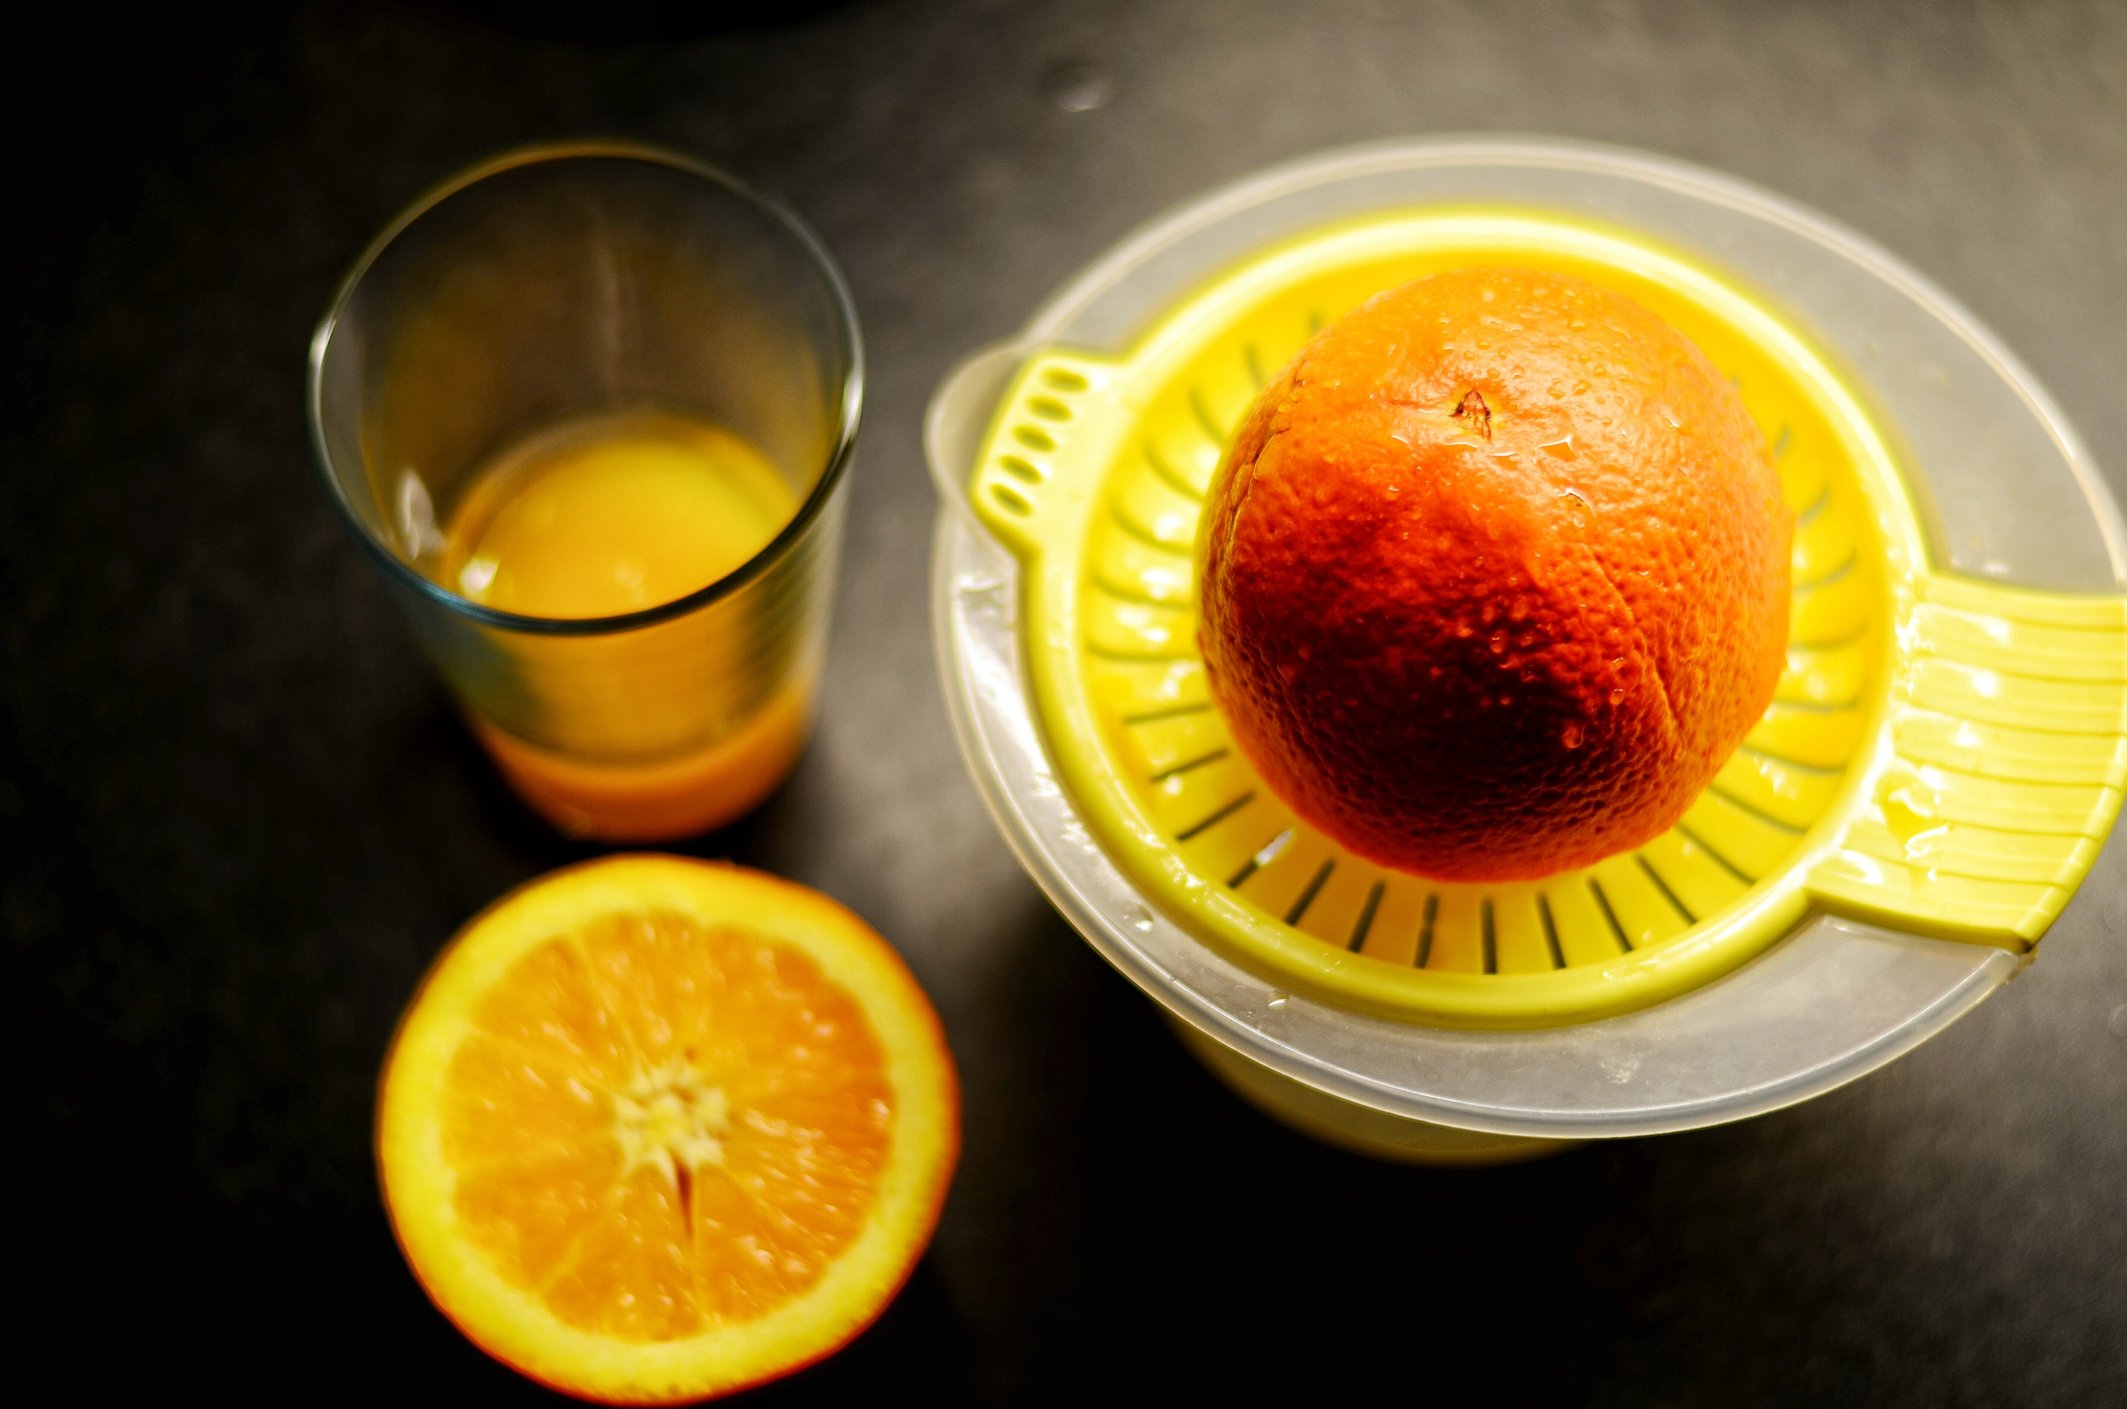 Close-up photo of an orange juicer | Photo: Getty Images